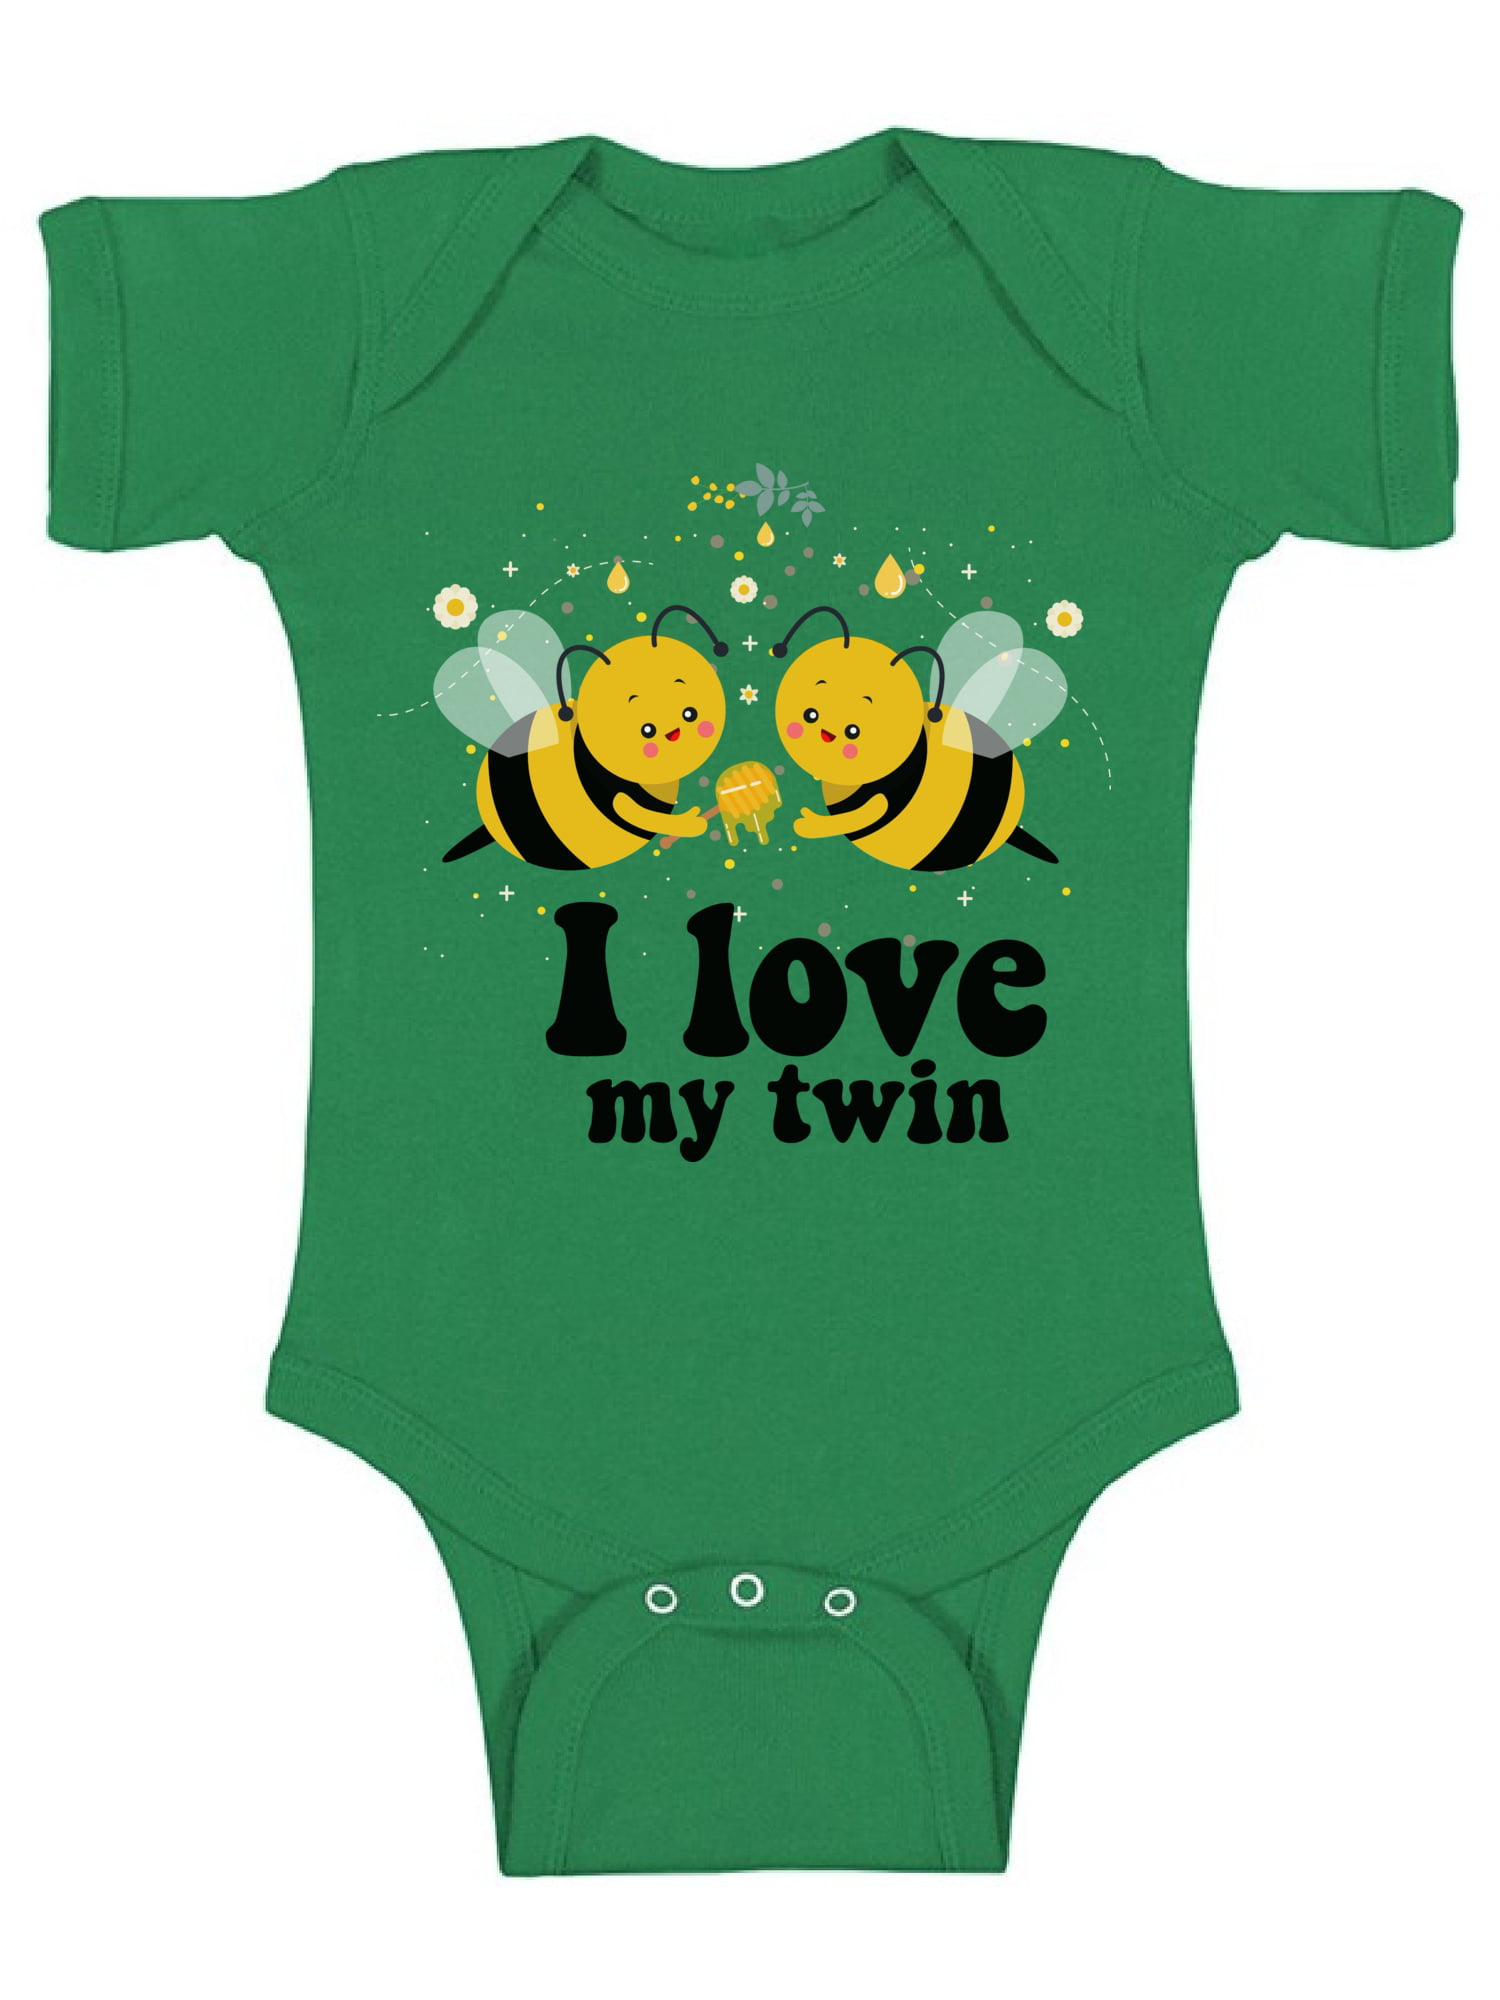 gifts for 1 year old boy twins